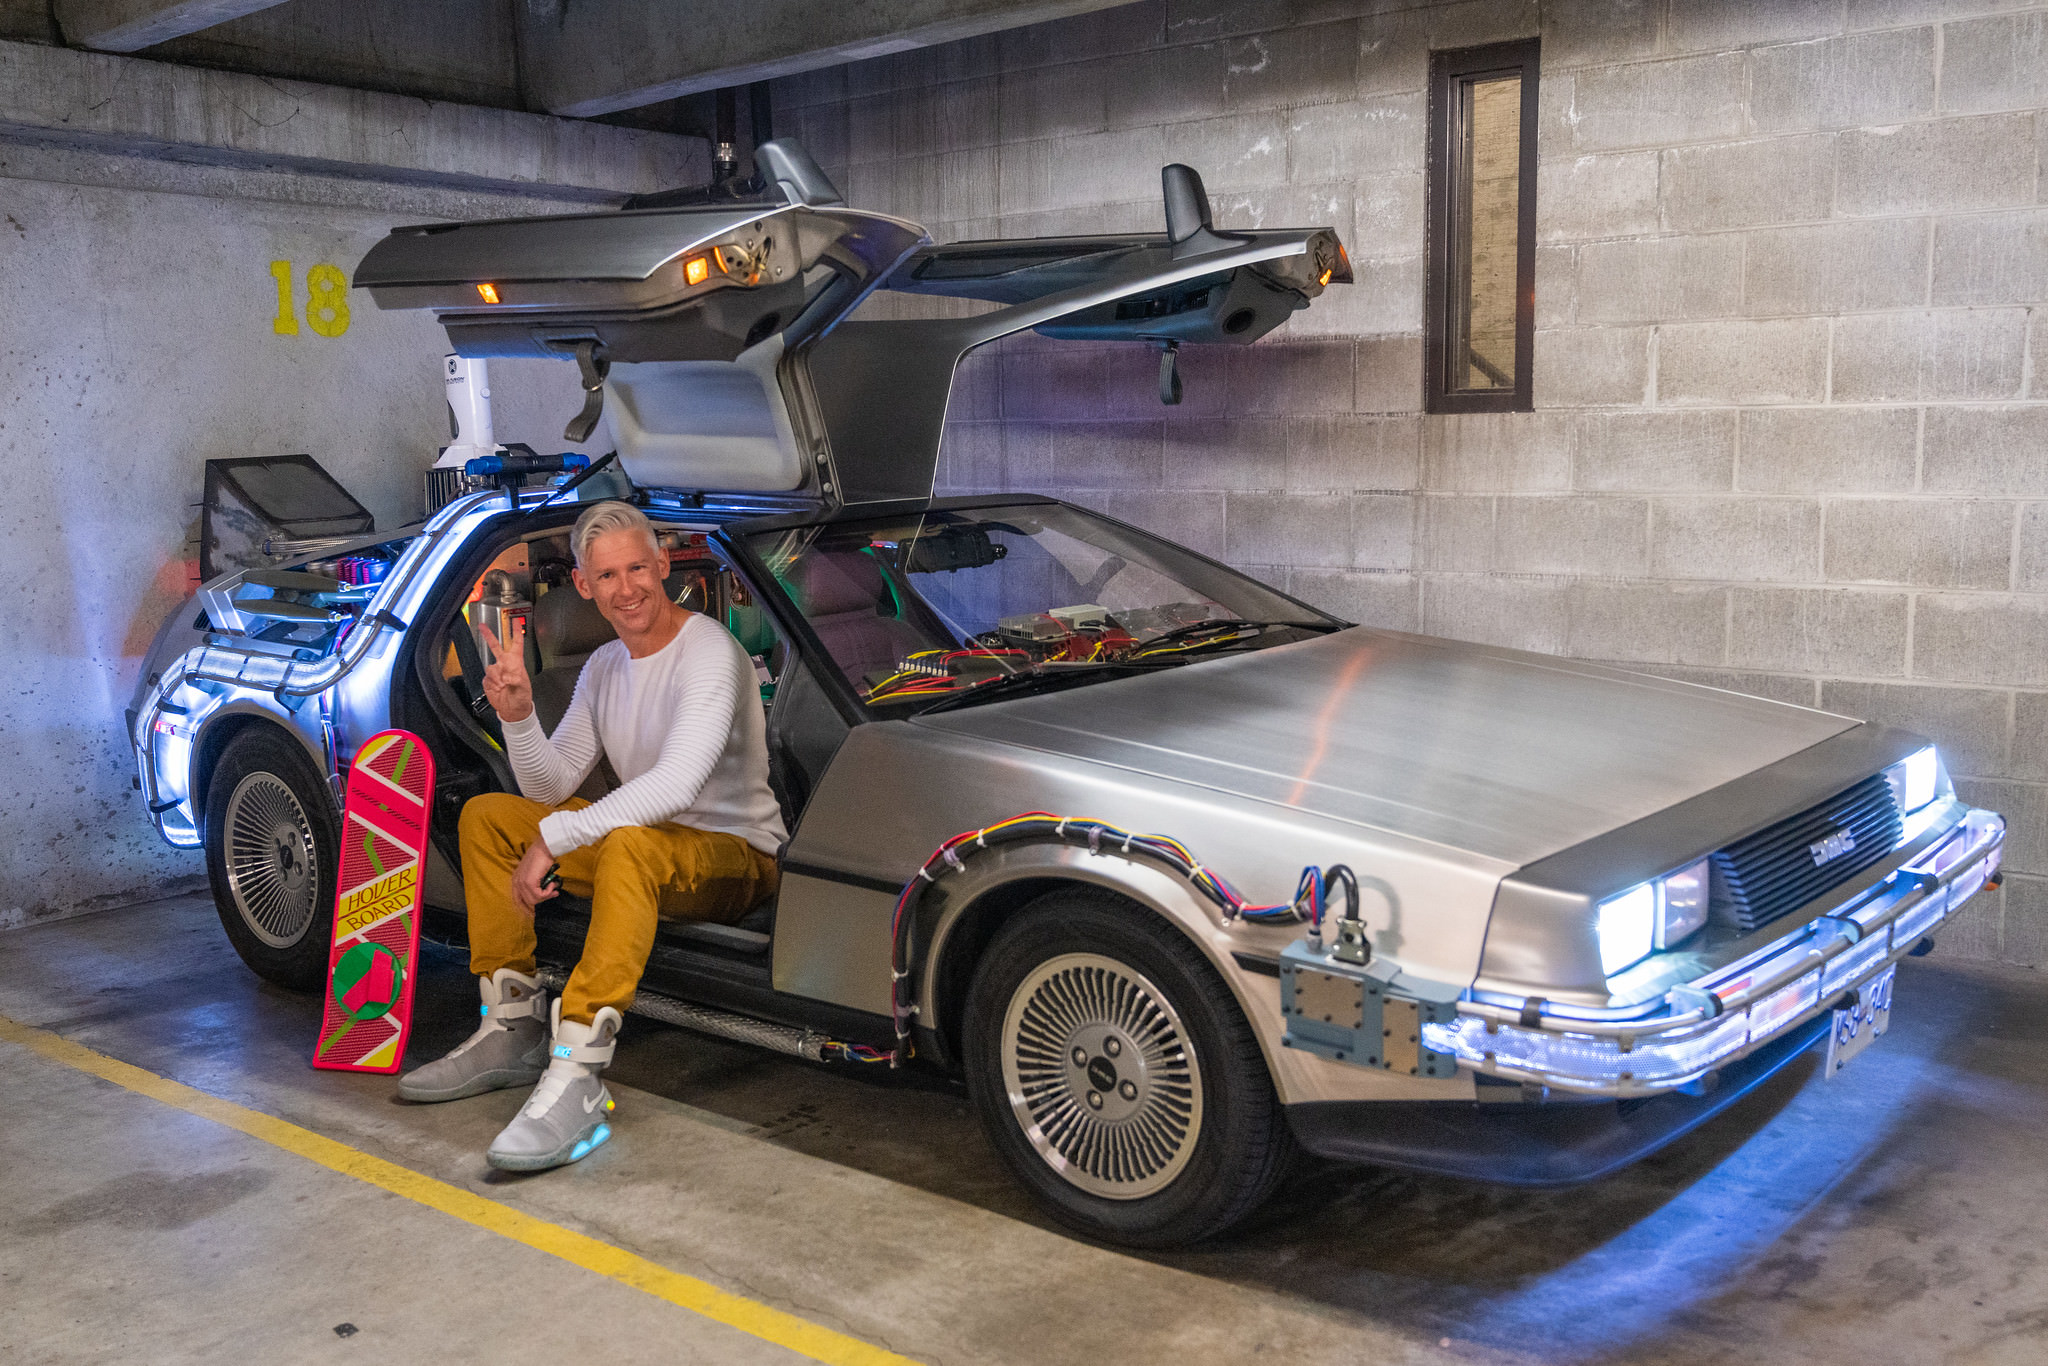 Scott with the DeLorean 'Time Machine' replica, with a hoverboard and replica Nike 'Air Mag' shoes.